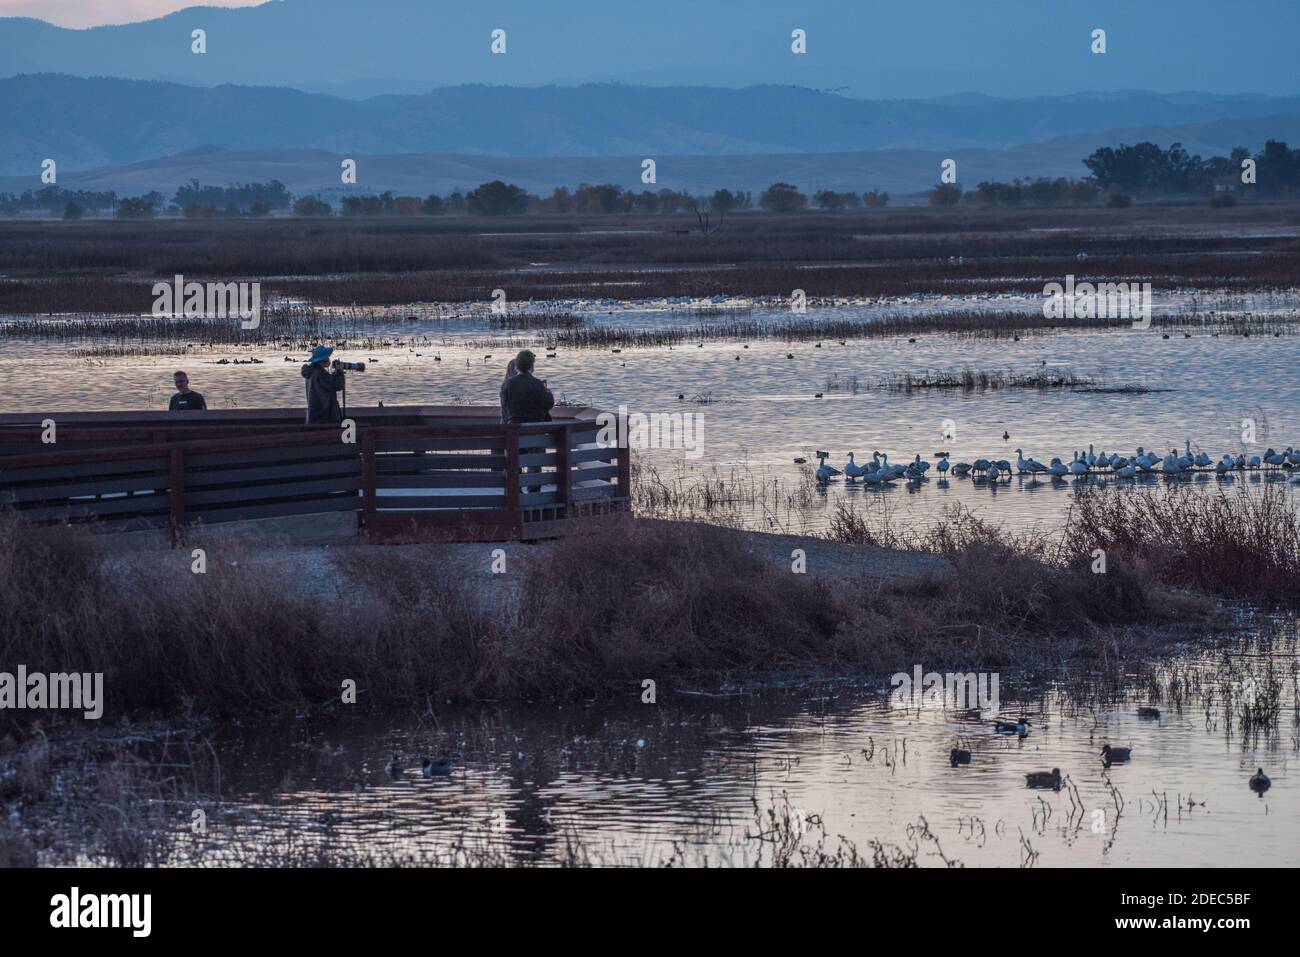 Visitors to Sacramento National wildlife refuge in California stand at an observation platform observing the nearby waterfowl in the marsh. Stock Photo